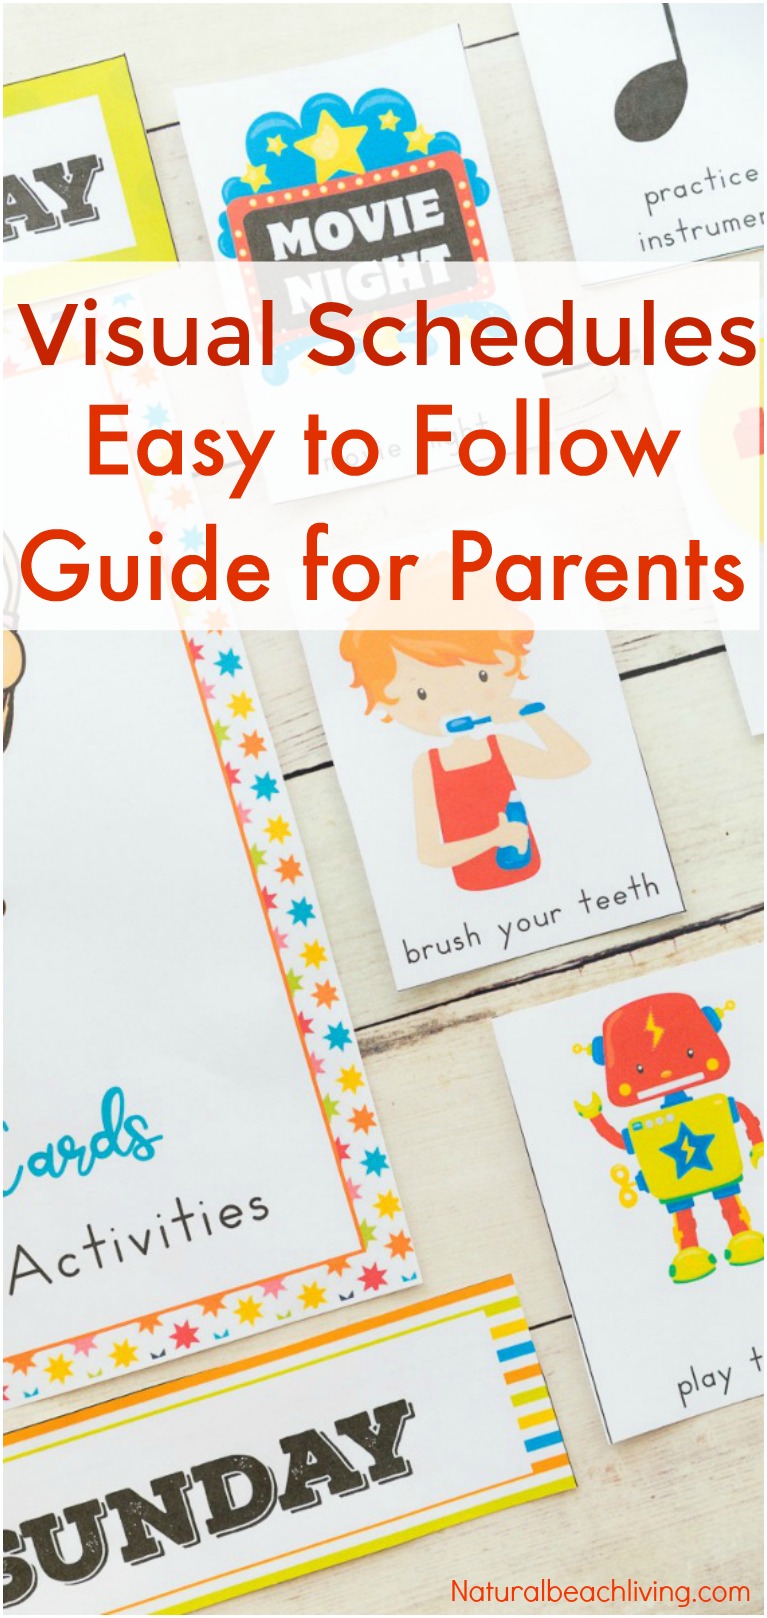 Visual Schedules – The Easy to Follow Guide for Parents